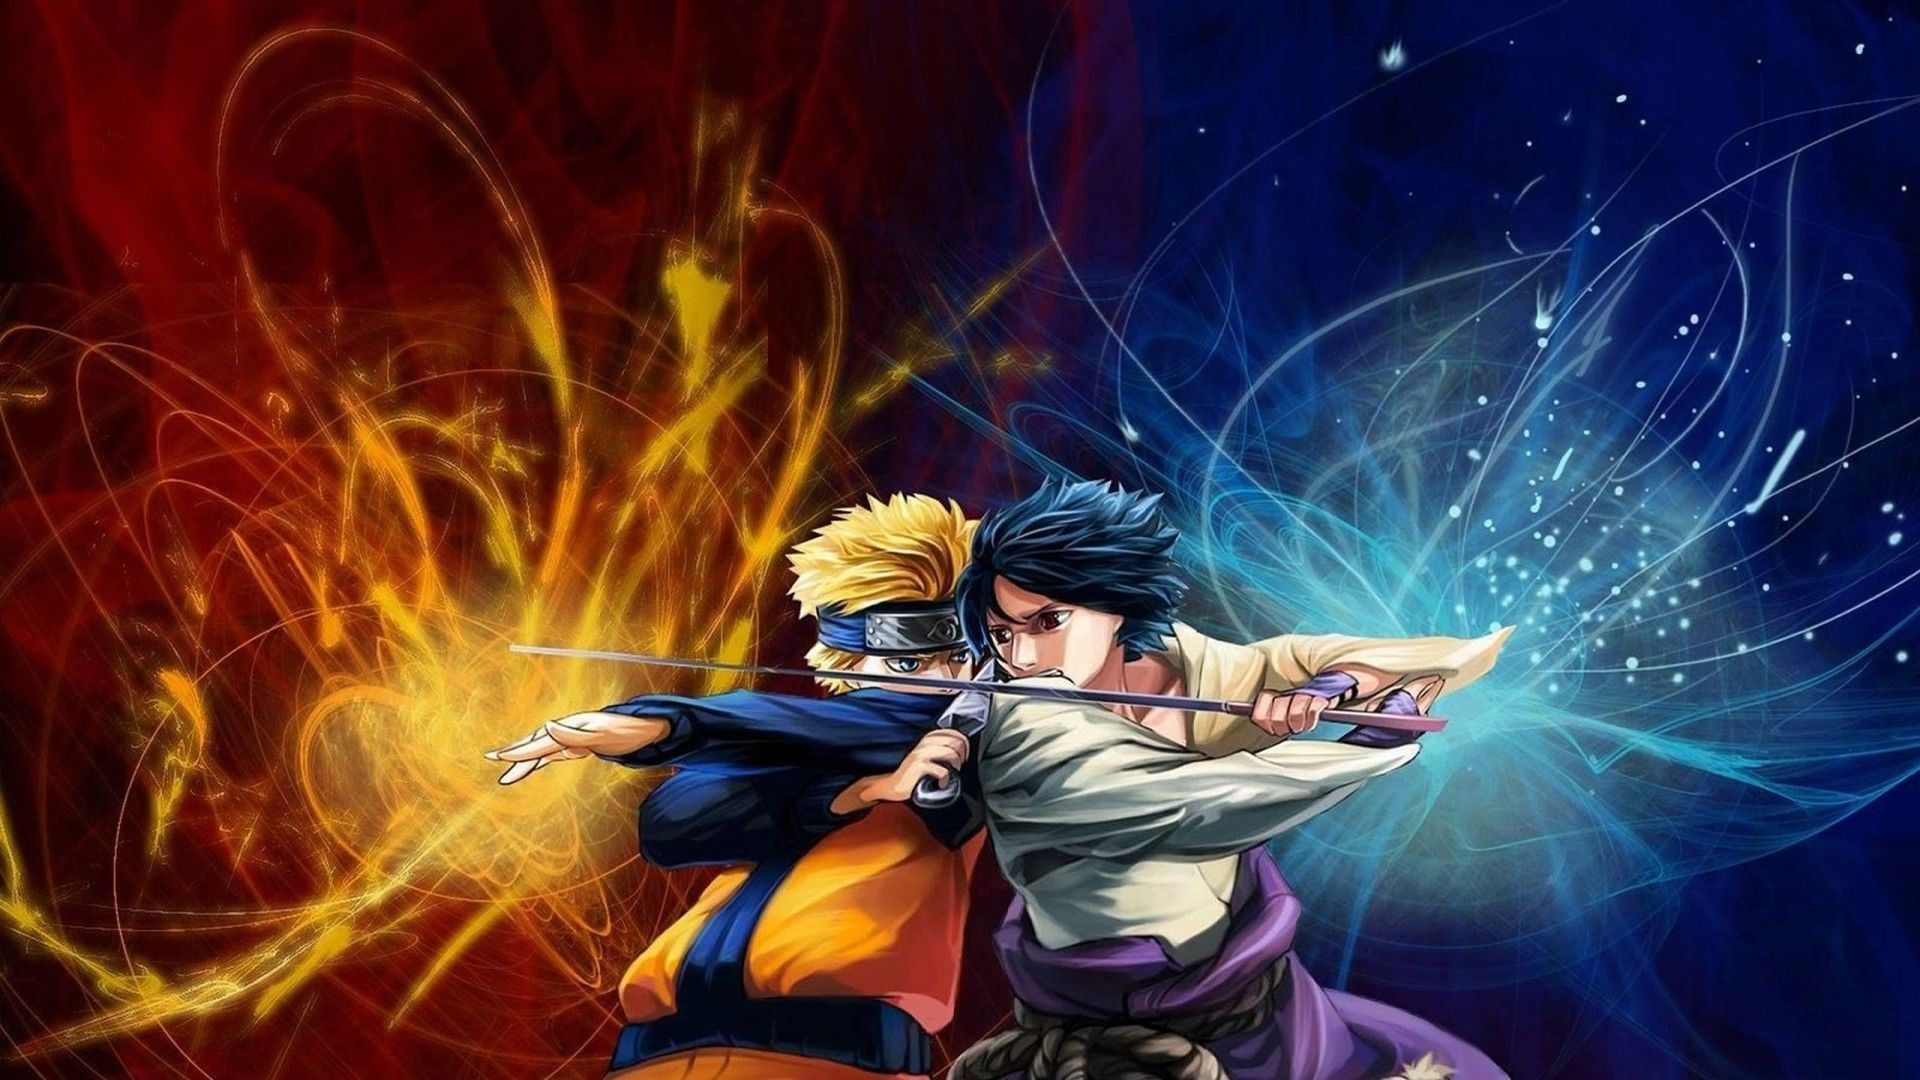 Naruto hình nền (Naruto wallpaper): Immerse yourself in the world of Naruto with a breathtaking anime wallpaper. This image is sure to transport you to the epic landscapes and thrilling battles of the series.